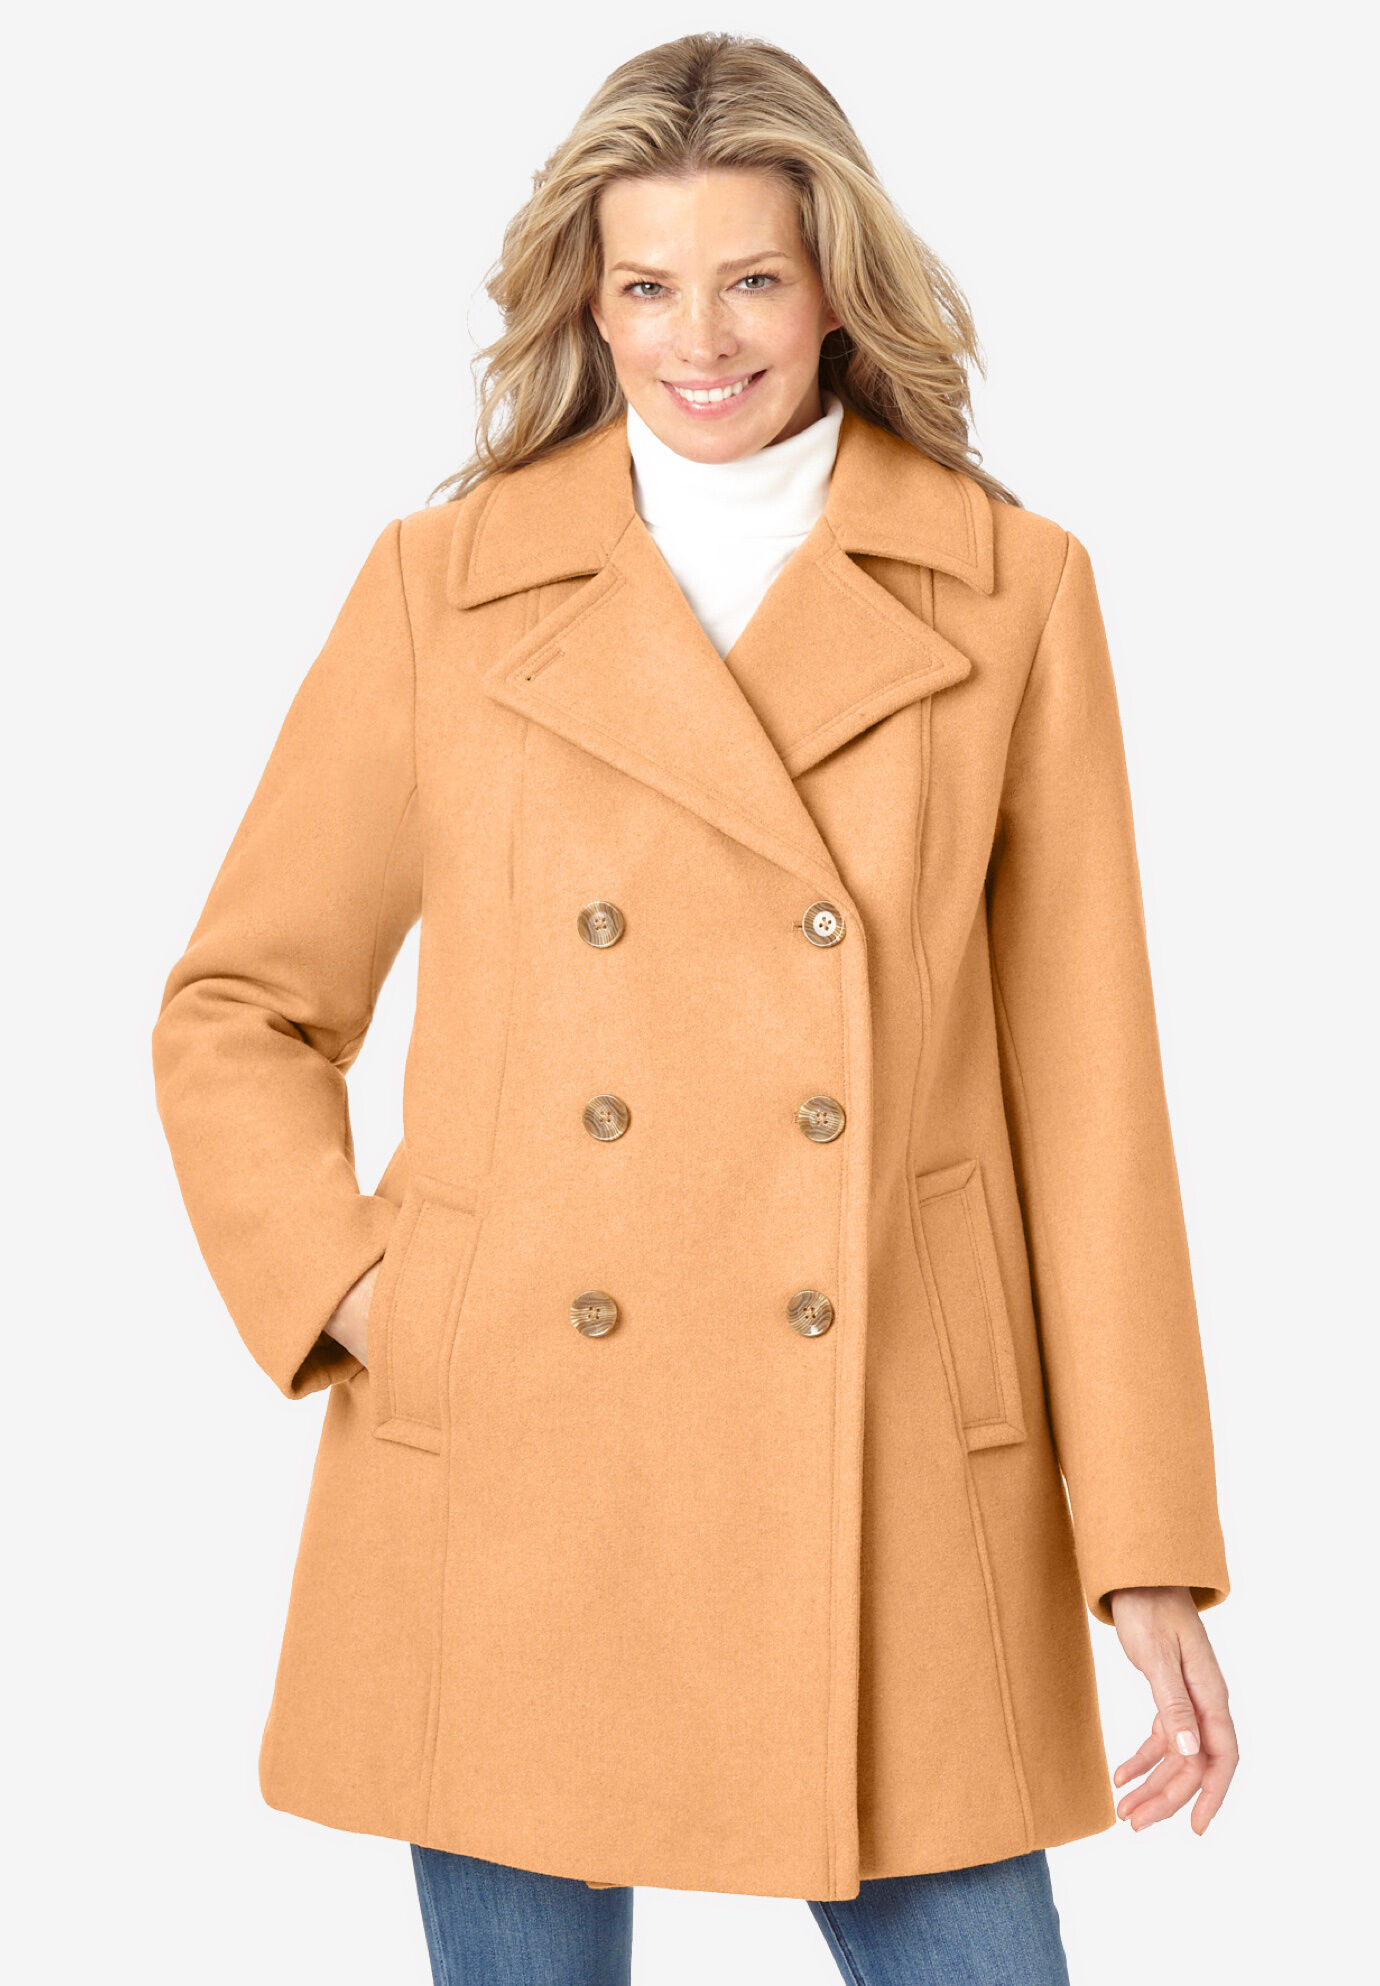 Whitive Womens Wool Blends Slim Fit Jackets Open-Front Long Pea Coat 